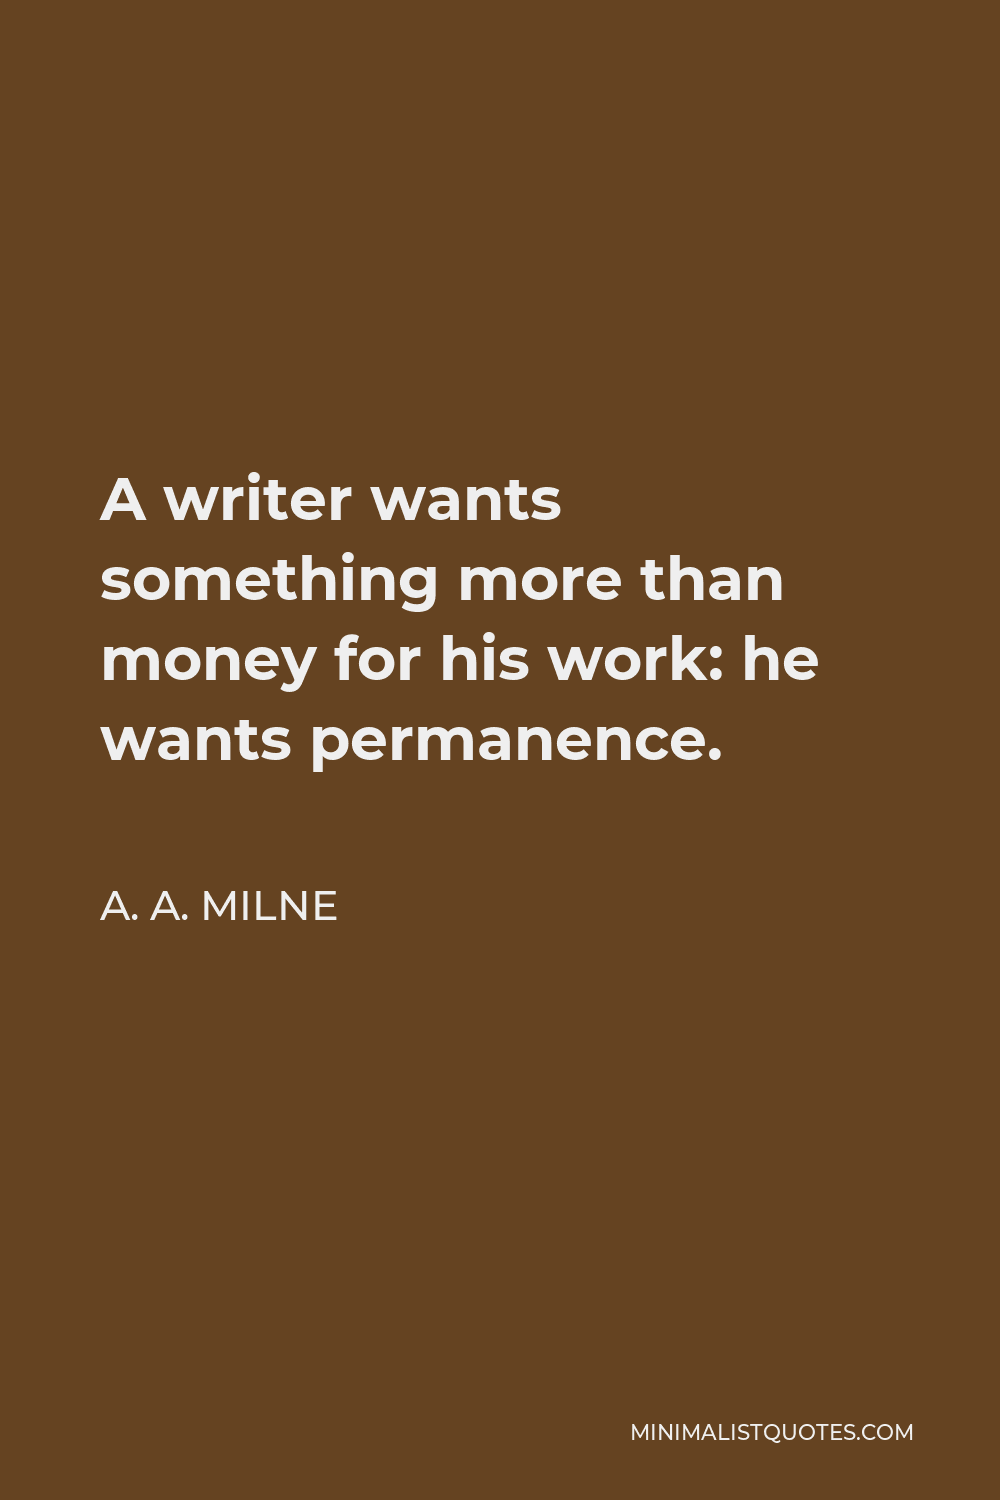 A. A. Milne Quote - A writer wants something more than money for his work: he wants permanence.